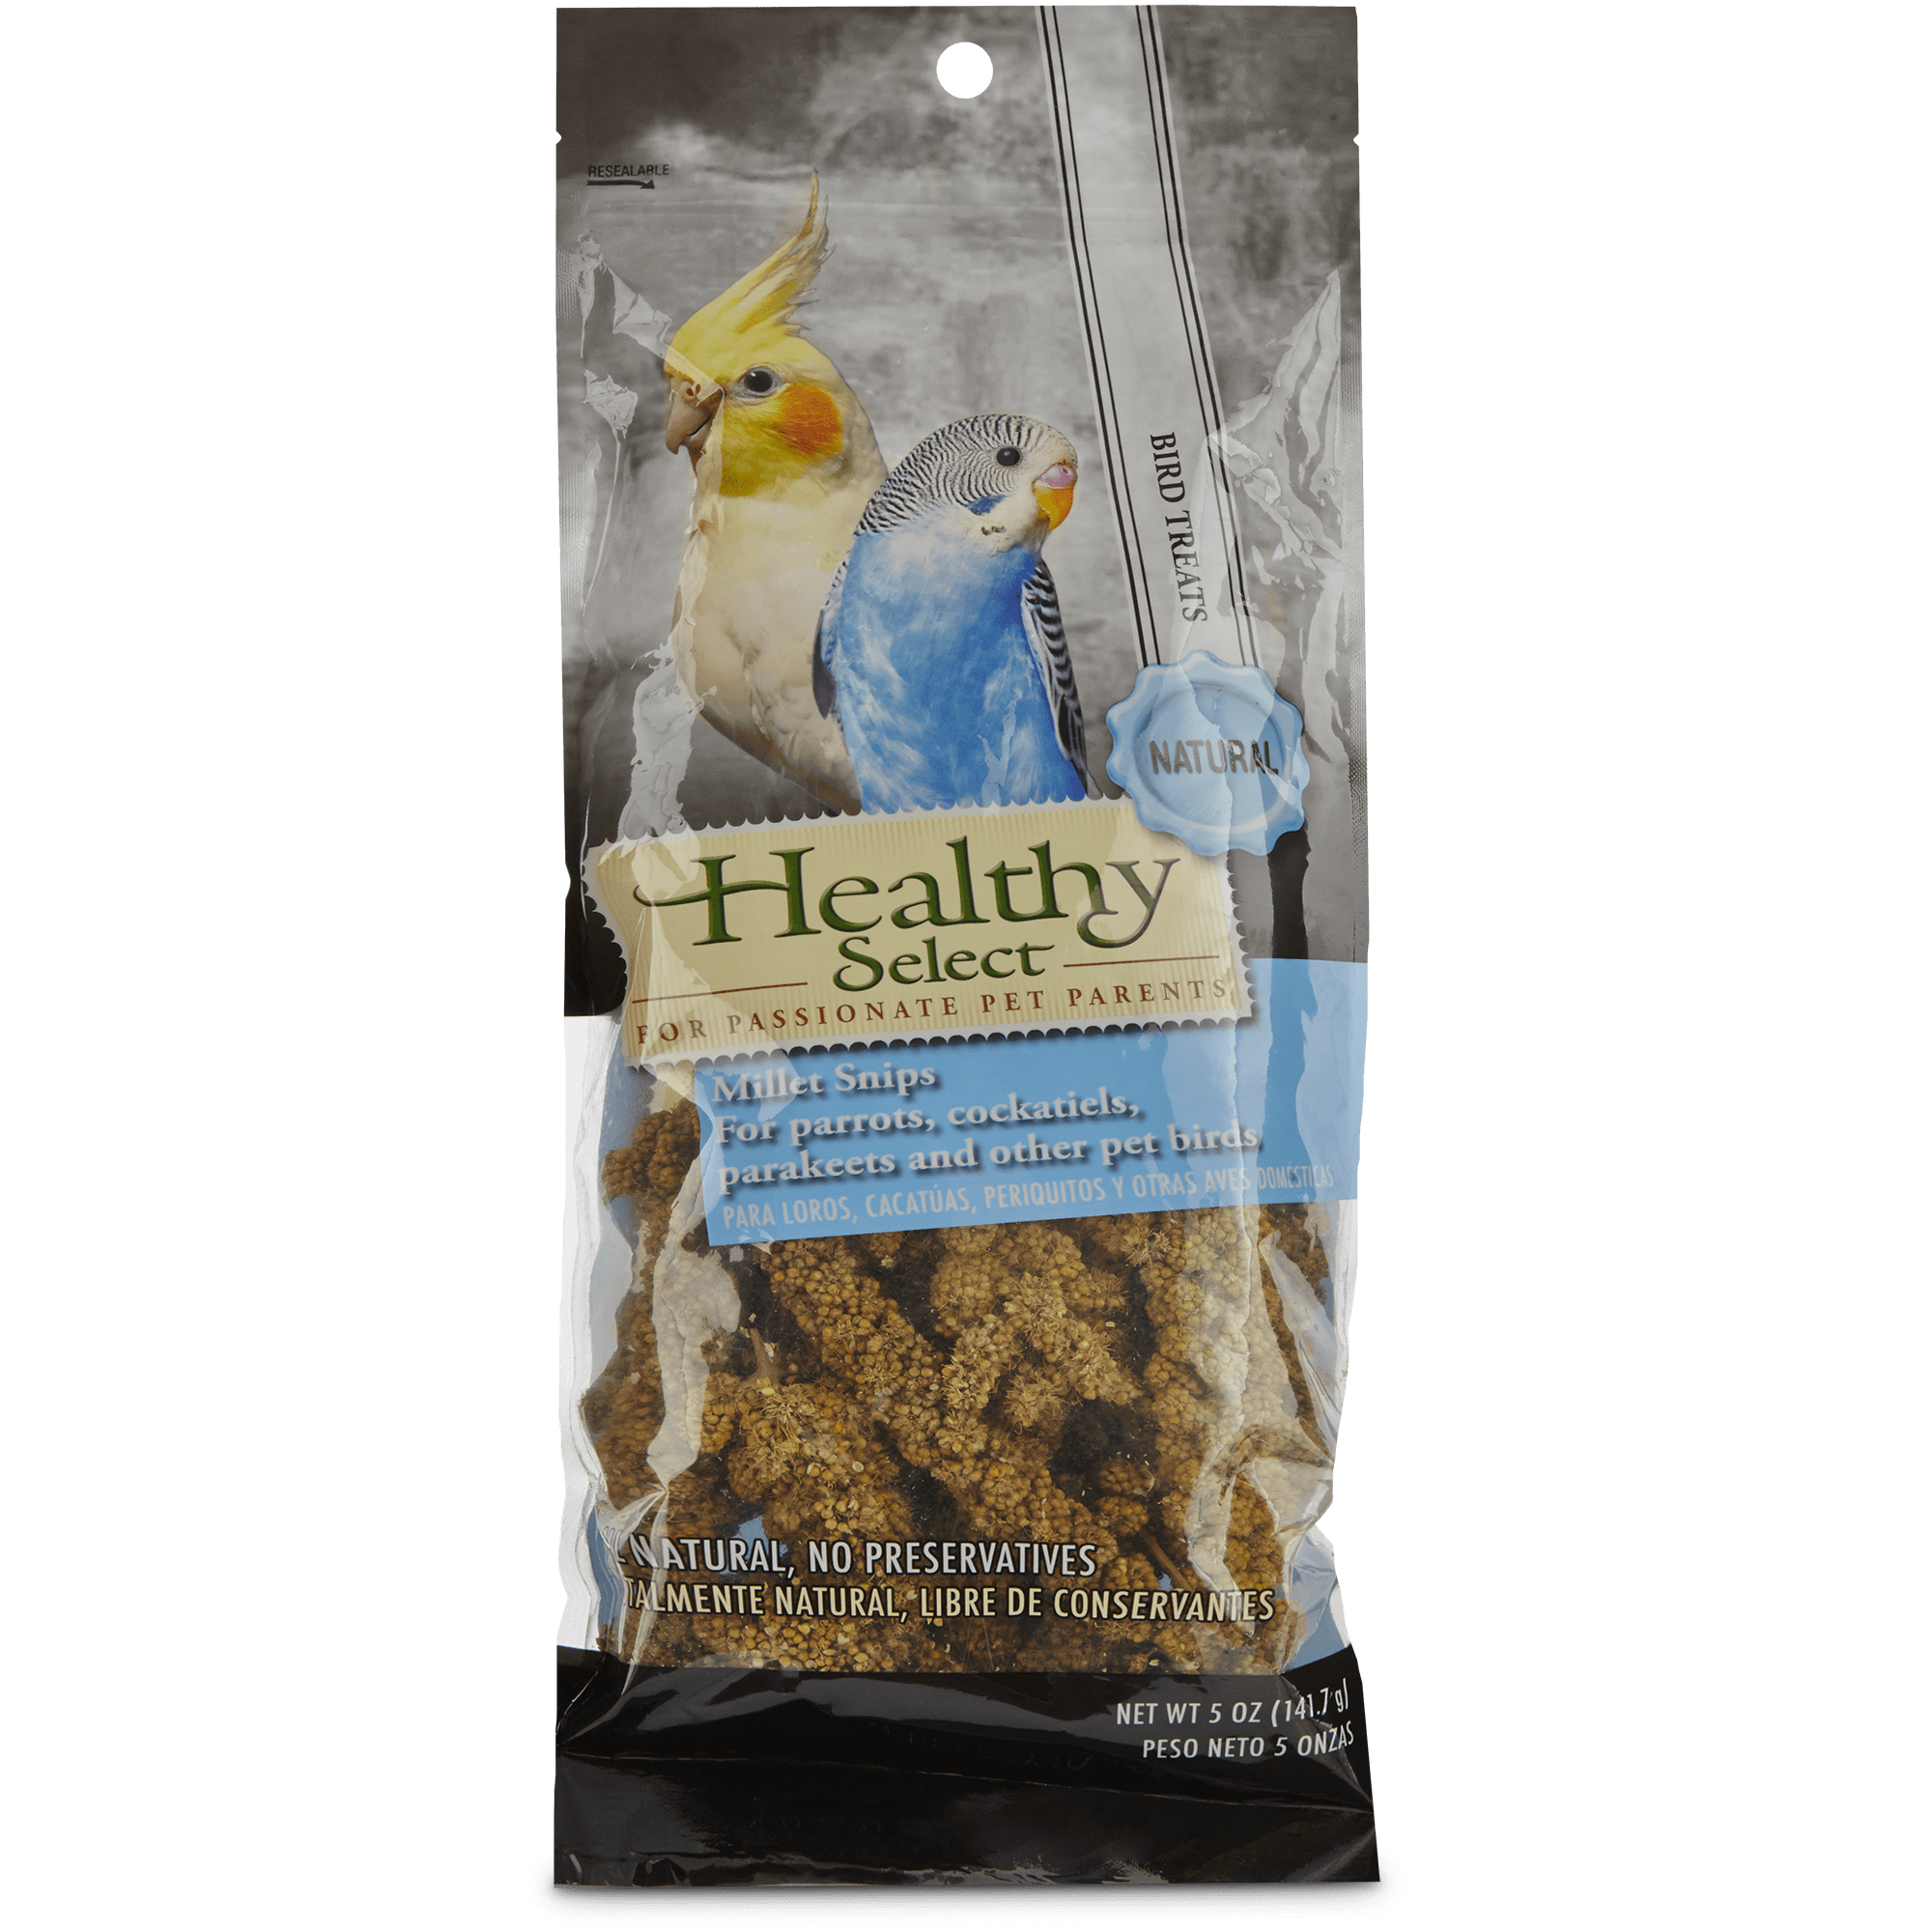 Healthy Select Millet Snips For Parrots Cockatiels Parakeets And Other Pet Birds 5 Oz Petco,Ornamental Grass Types